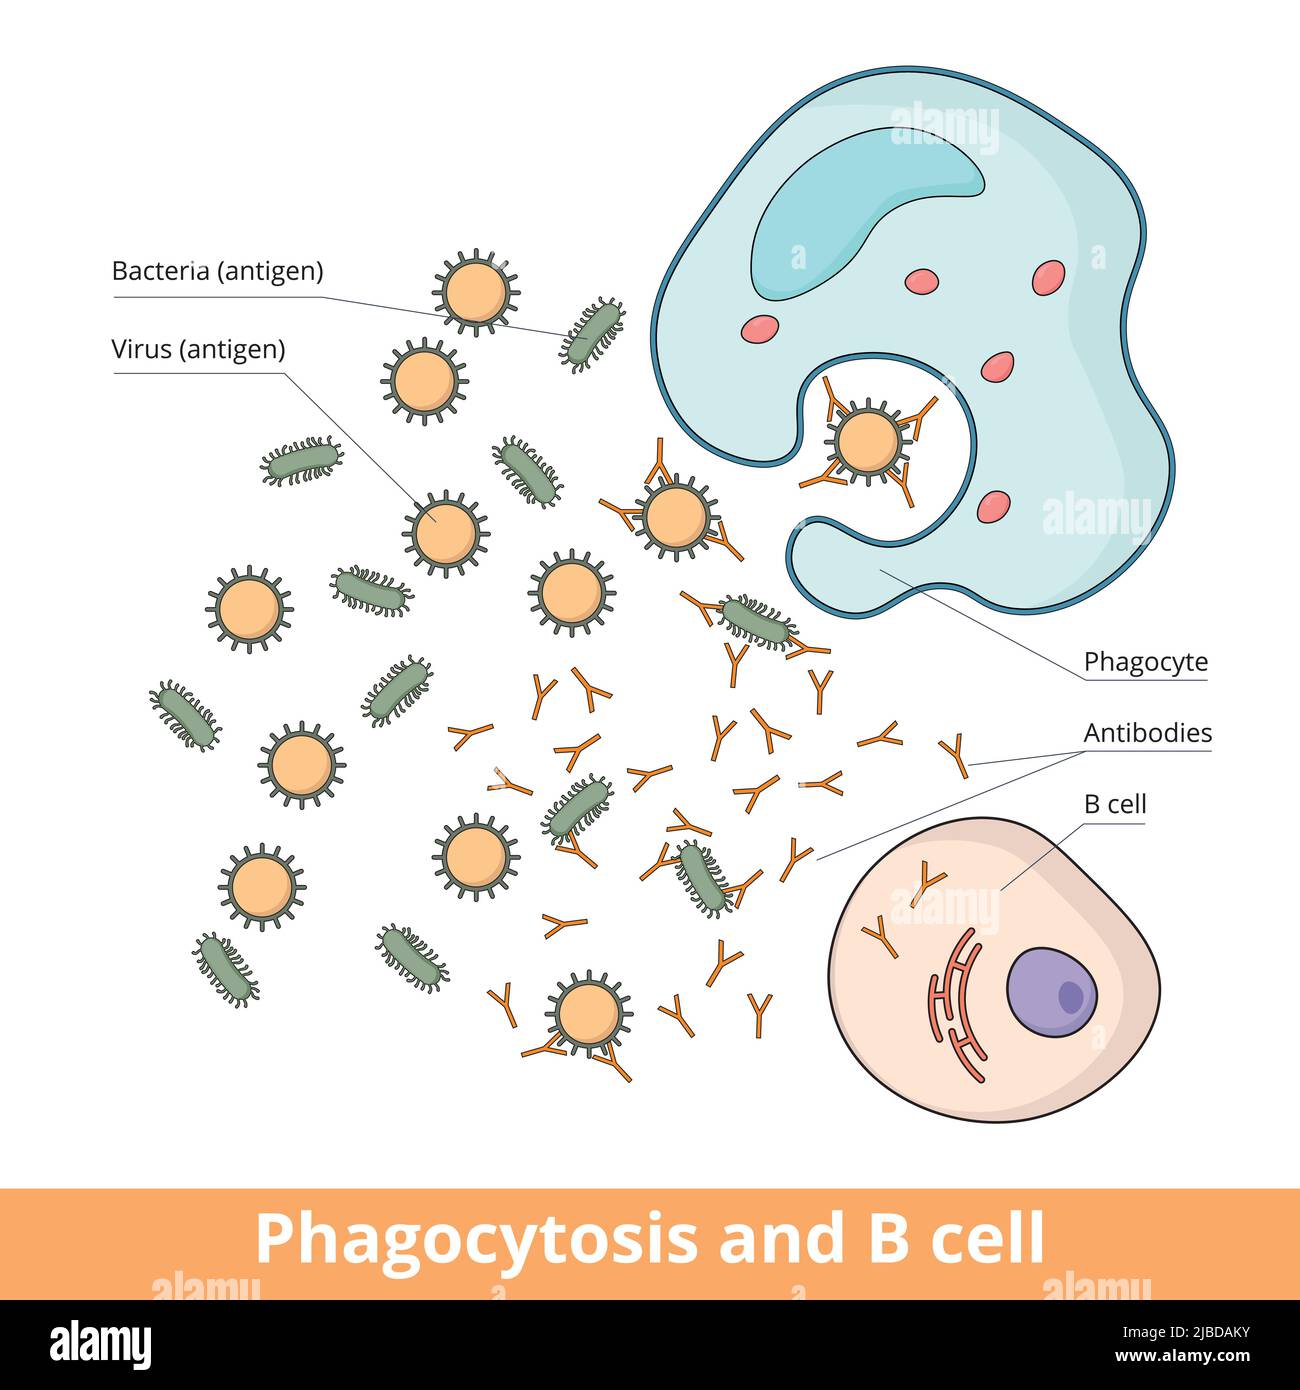 Cooperation between B cell and phagocyte during immune responce caused by bacteria or virus.  B cell produces antibodies that weaken antigen. Stock Vector